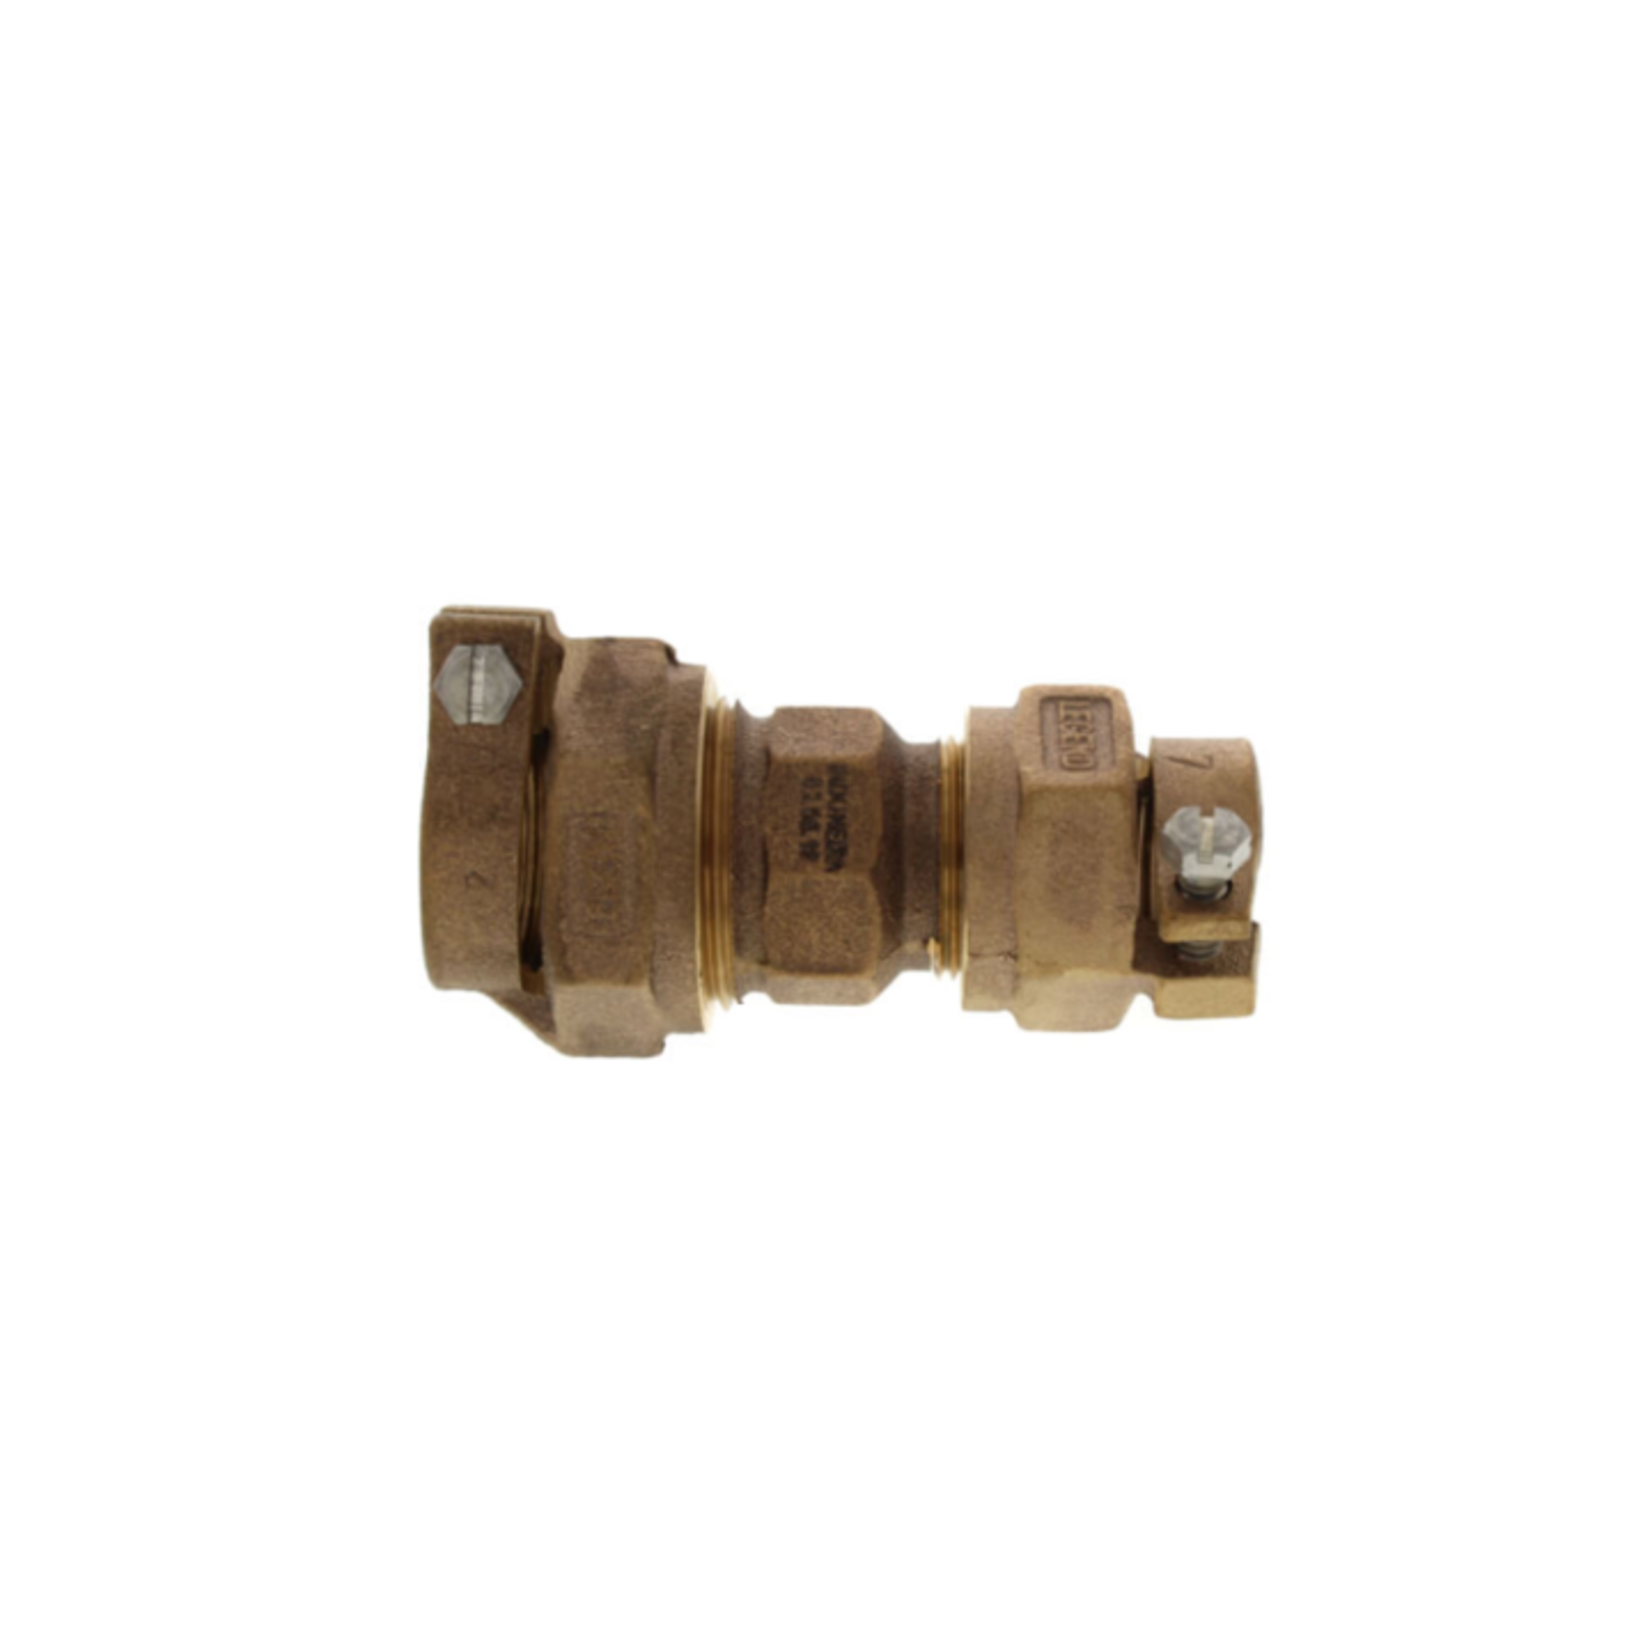 LEGEND VALVE 1 IN X 3/4 IN BRASS PACK JOINT COUPLING (CTS X CTS)